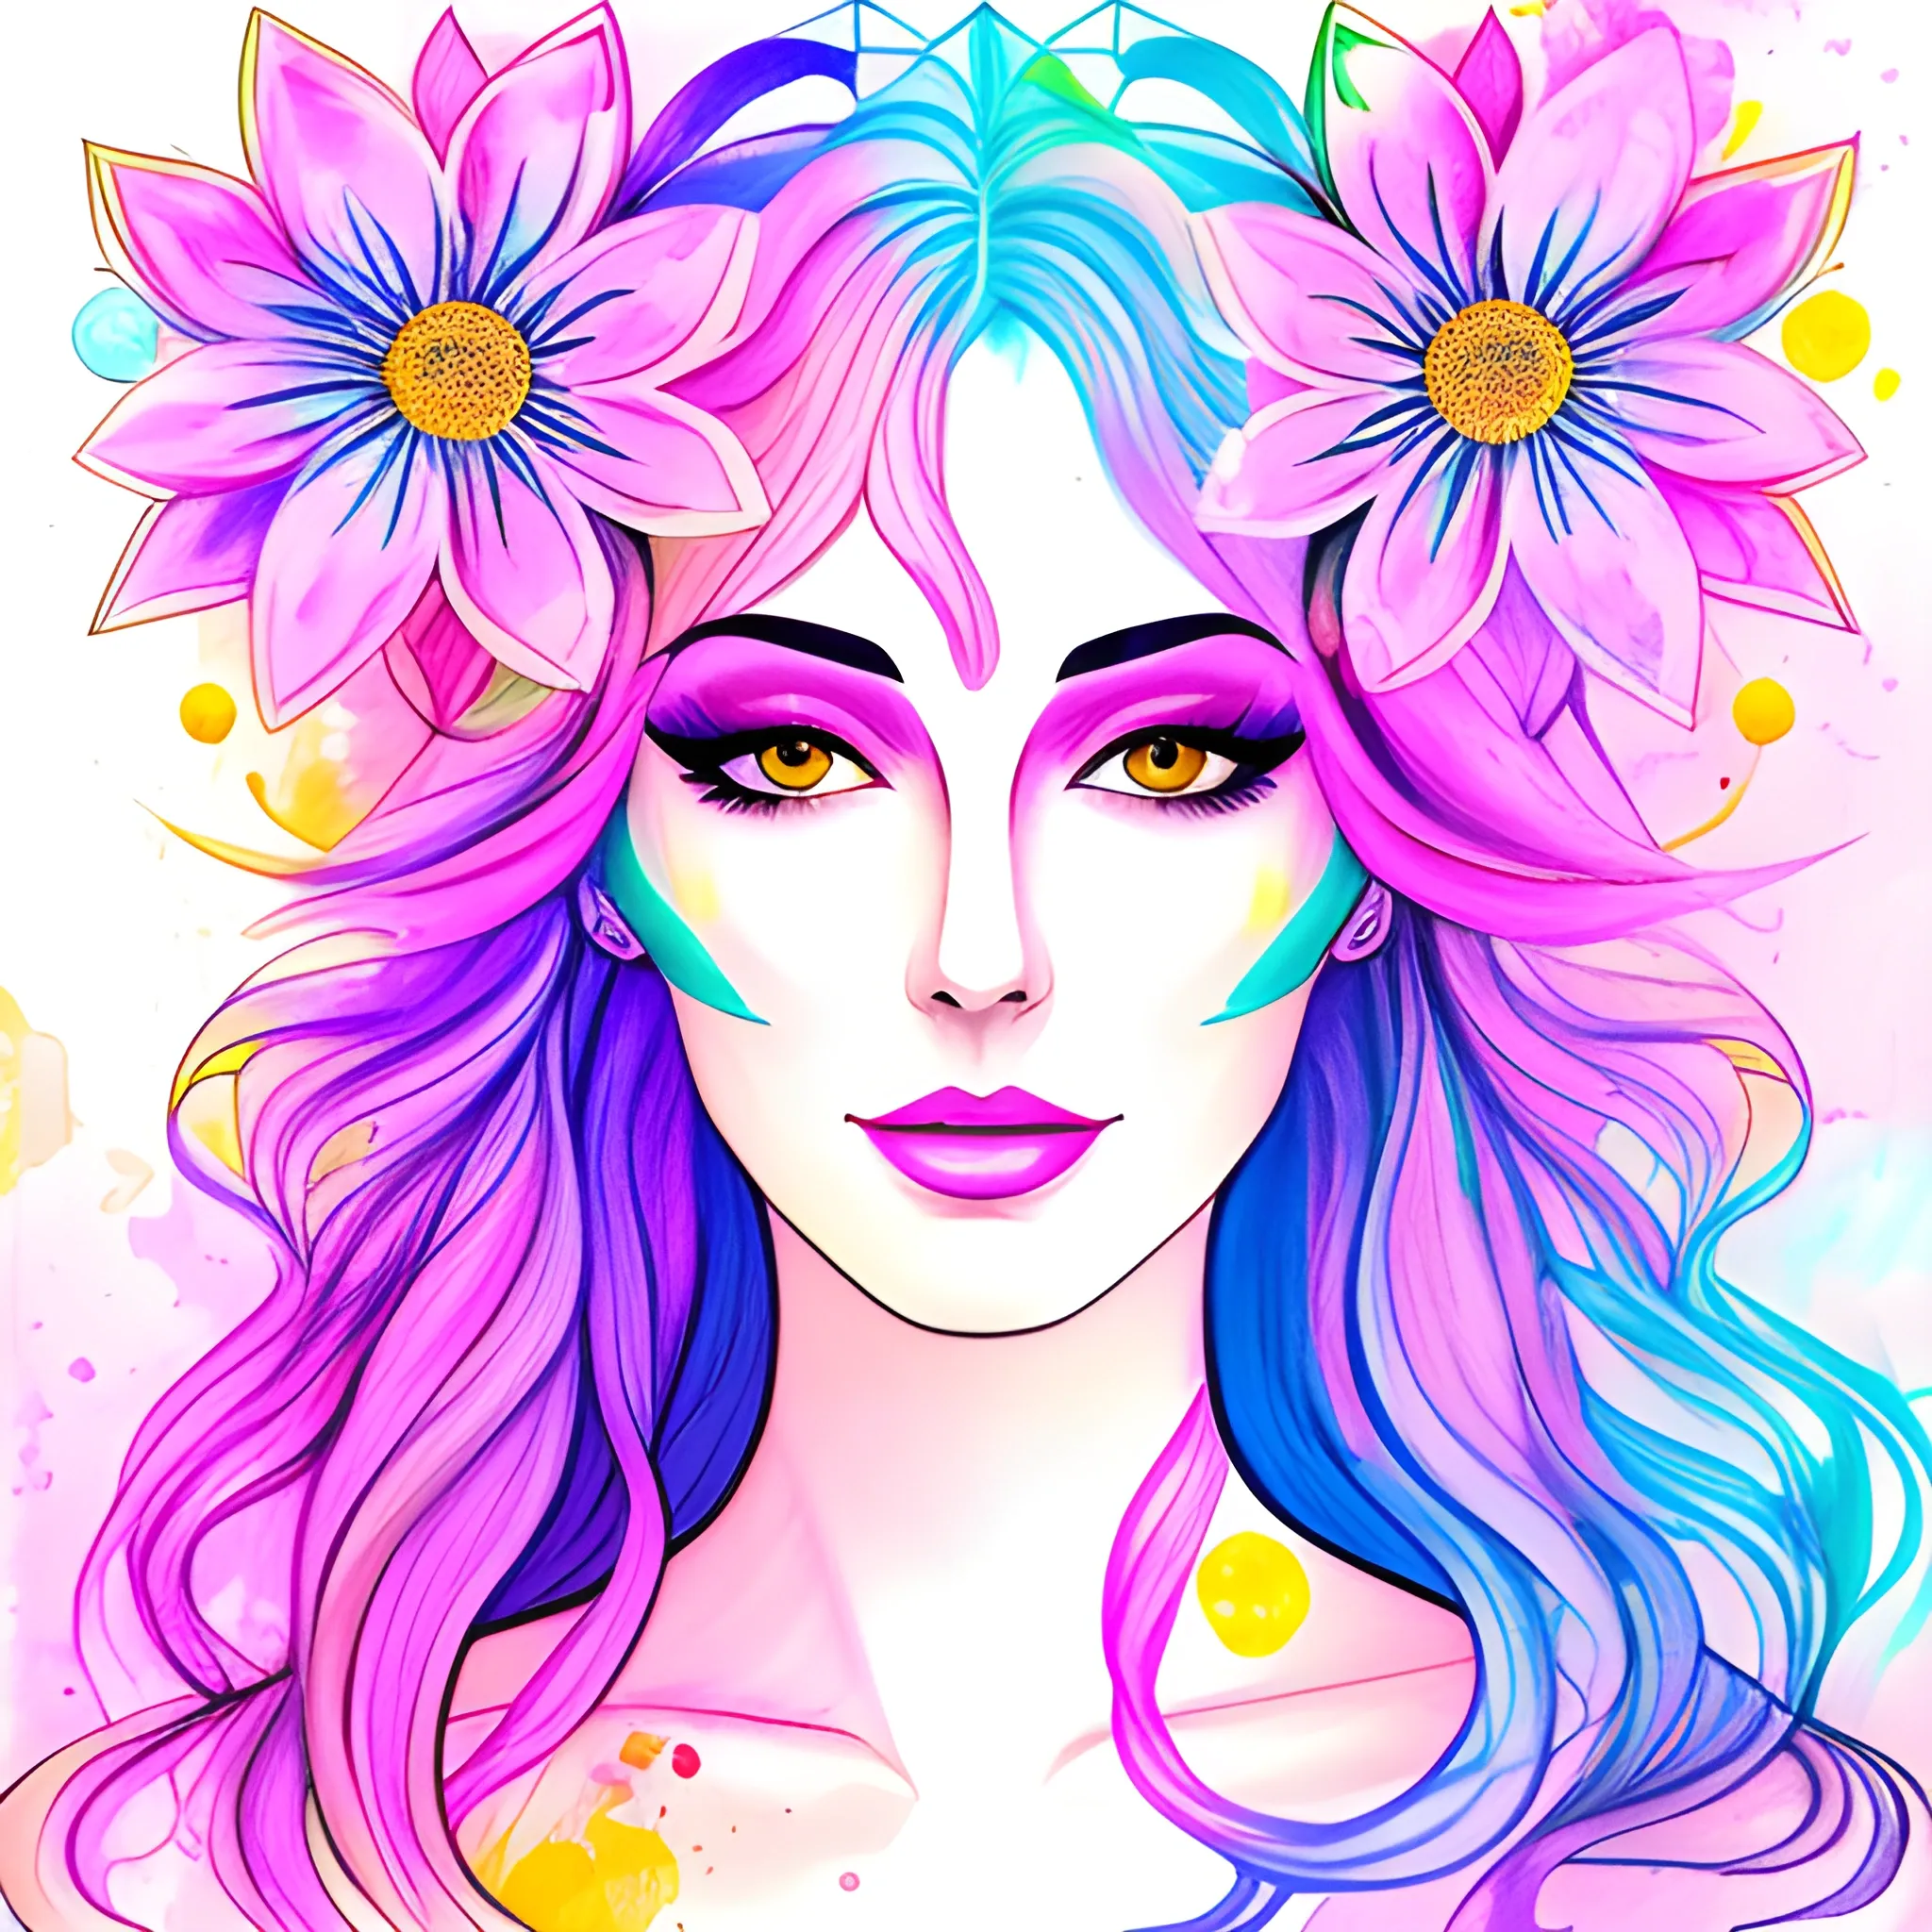 Beautiful girl, digitally drawn poster, pastel colors, simple ou ...